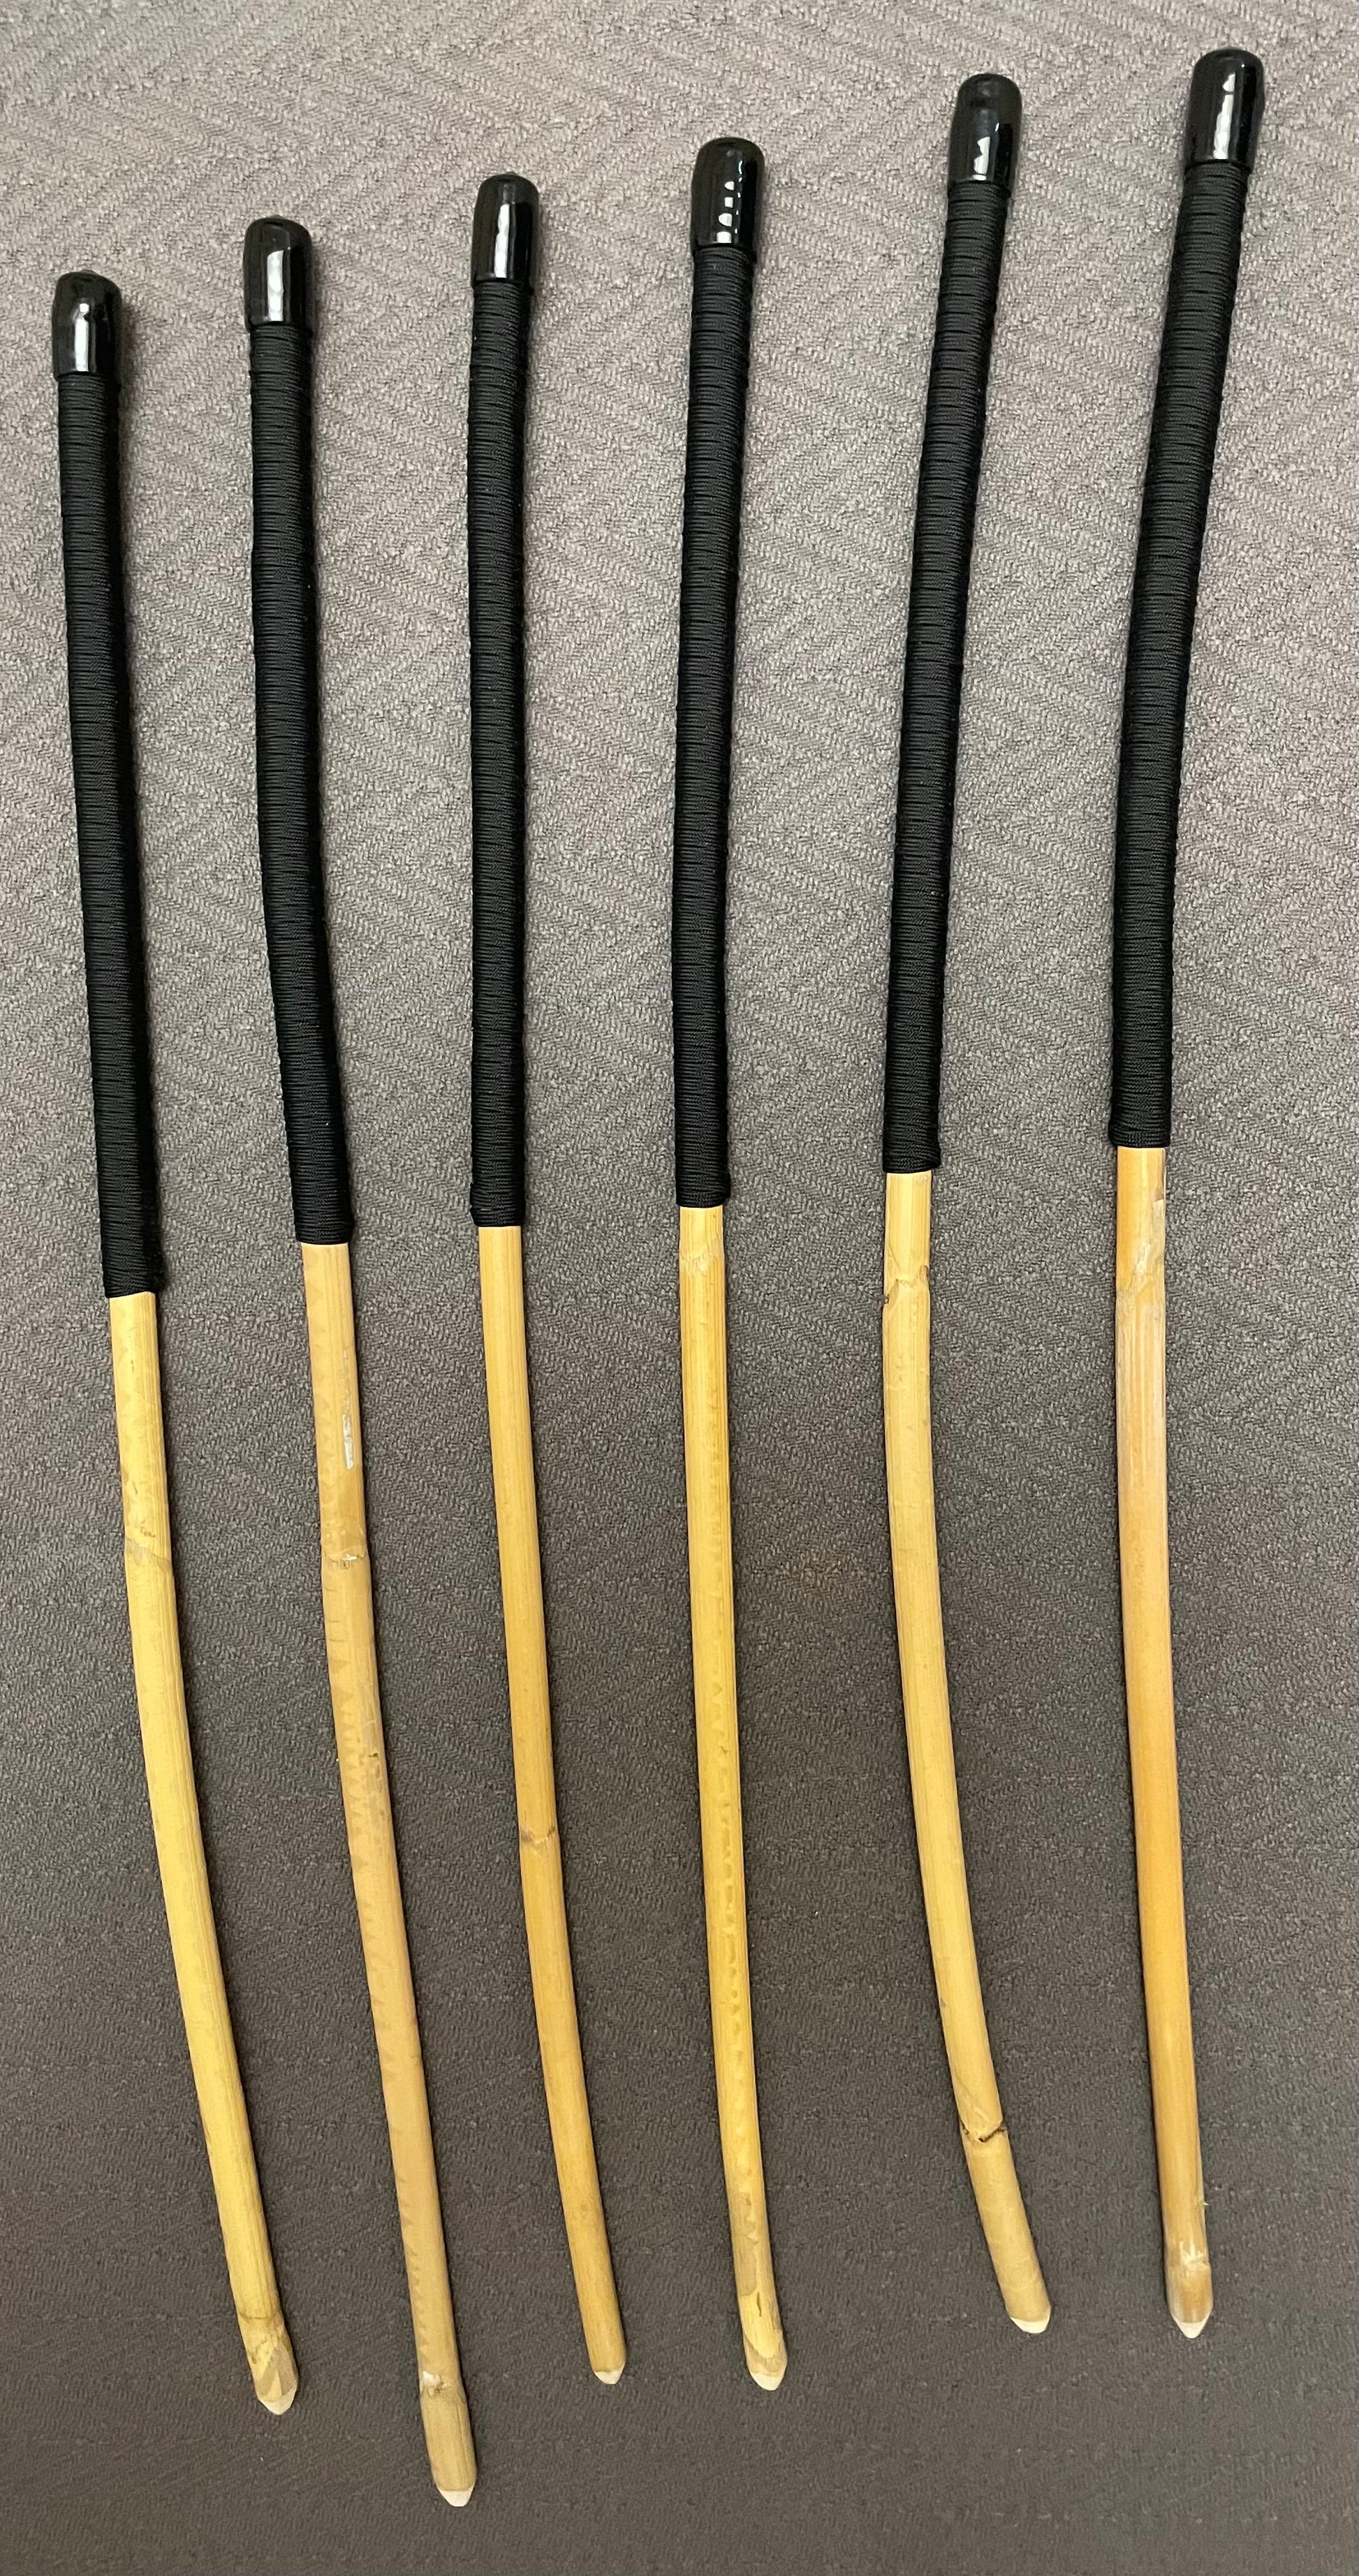 Set of 6 Classic Kooboo Rattan OTK Punishment canes with RED Paracord Handles - Over the Knee OTK Cane Set